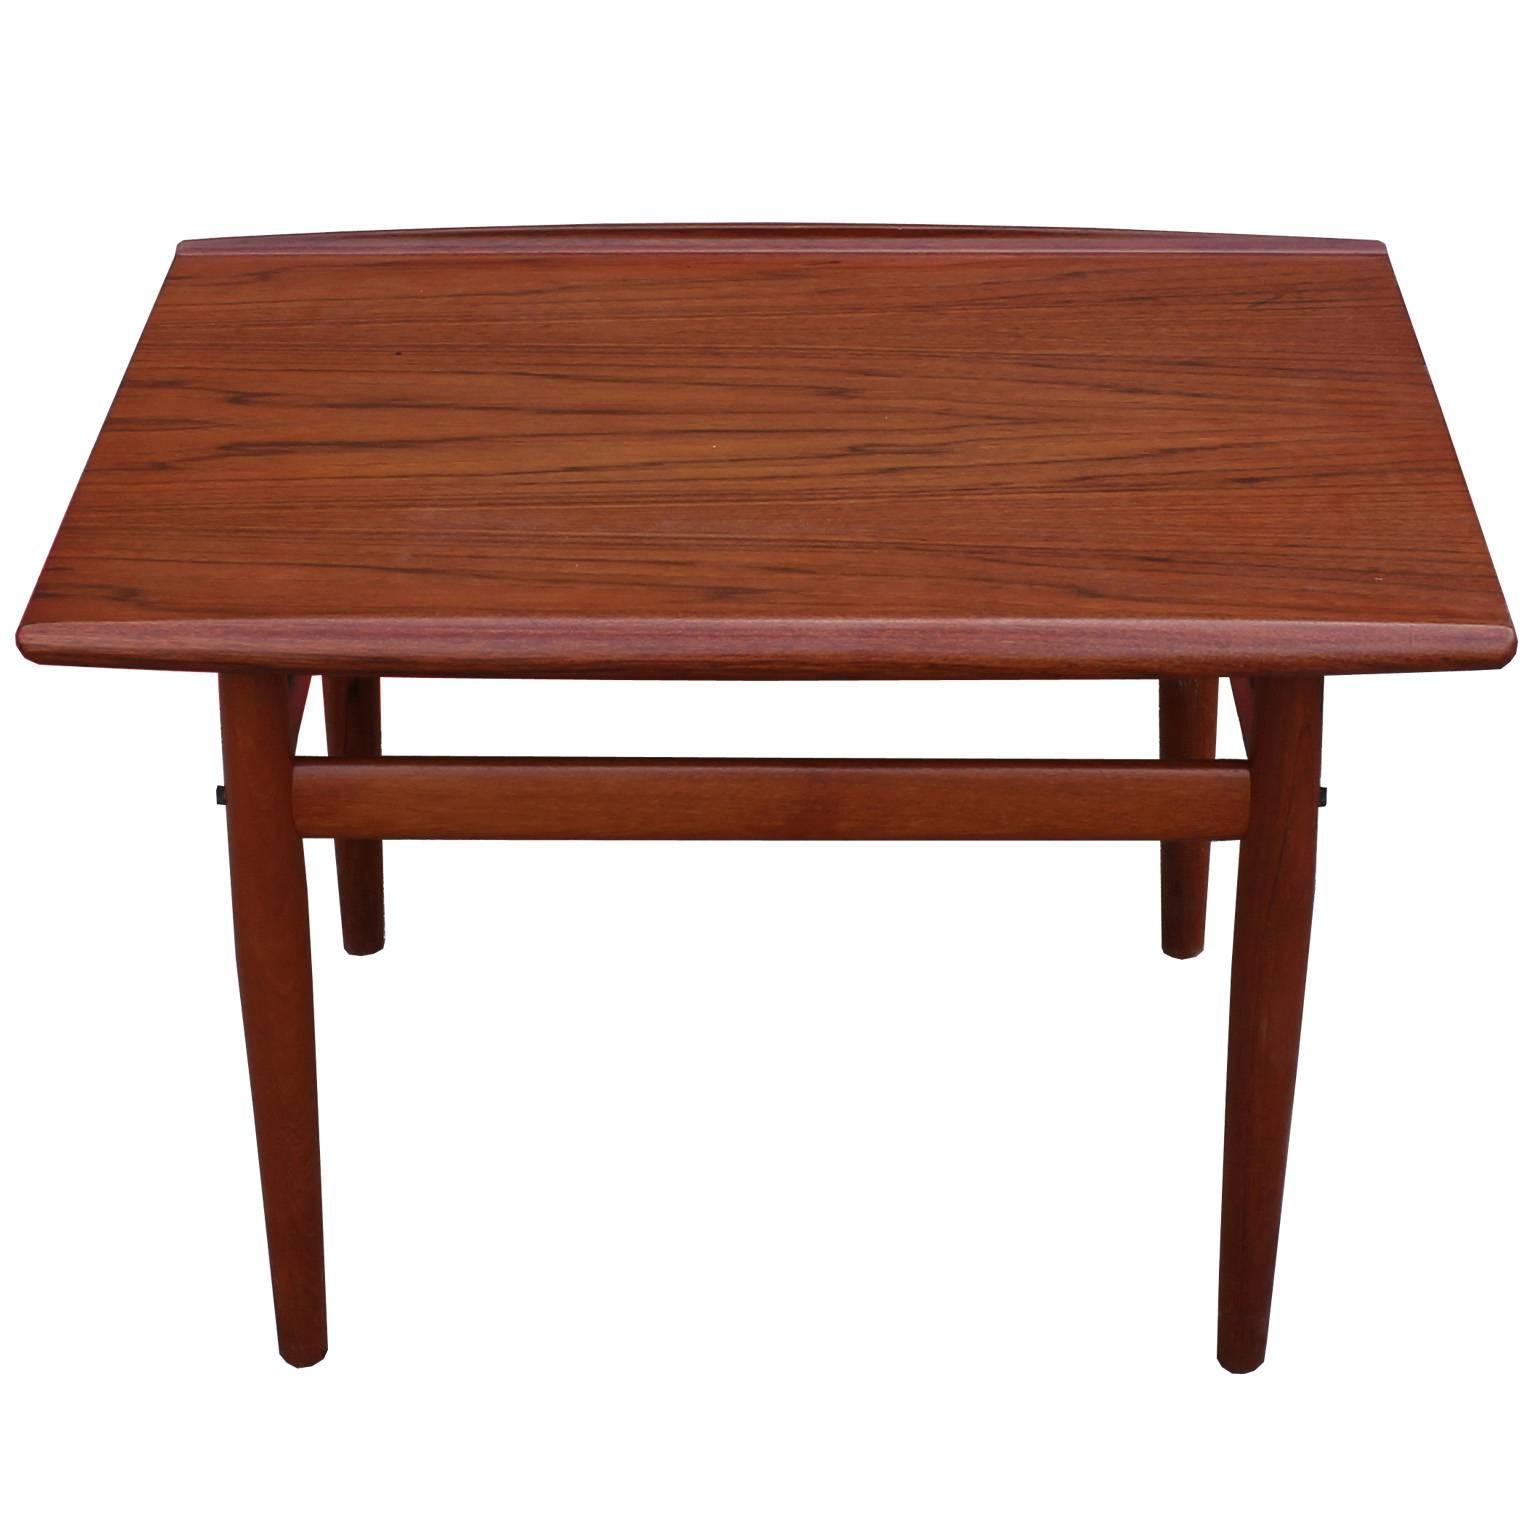 Beautiful teak end or side table designed by Danish designer Grete Jalk for Glostrup. Teak top has a stunning grain. Table has two small, unnoticeable burn marks but is otherwise in excellent condition.